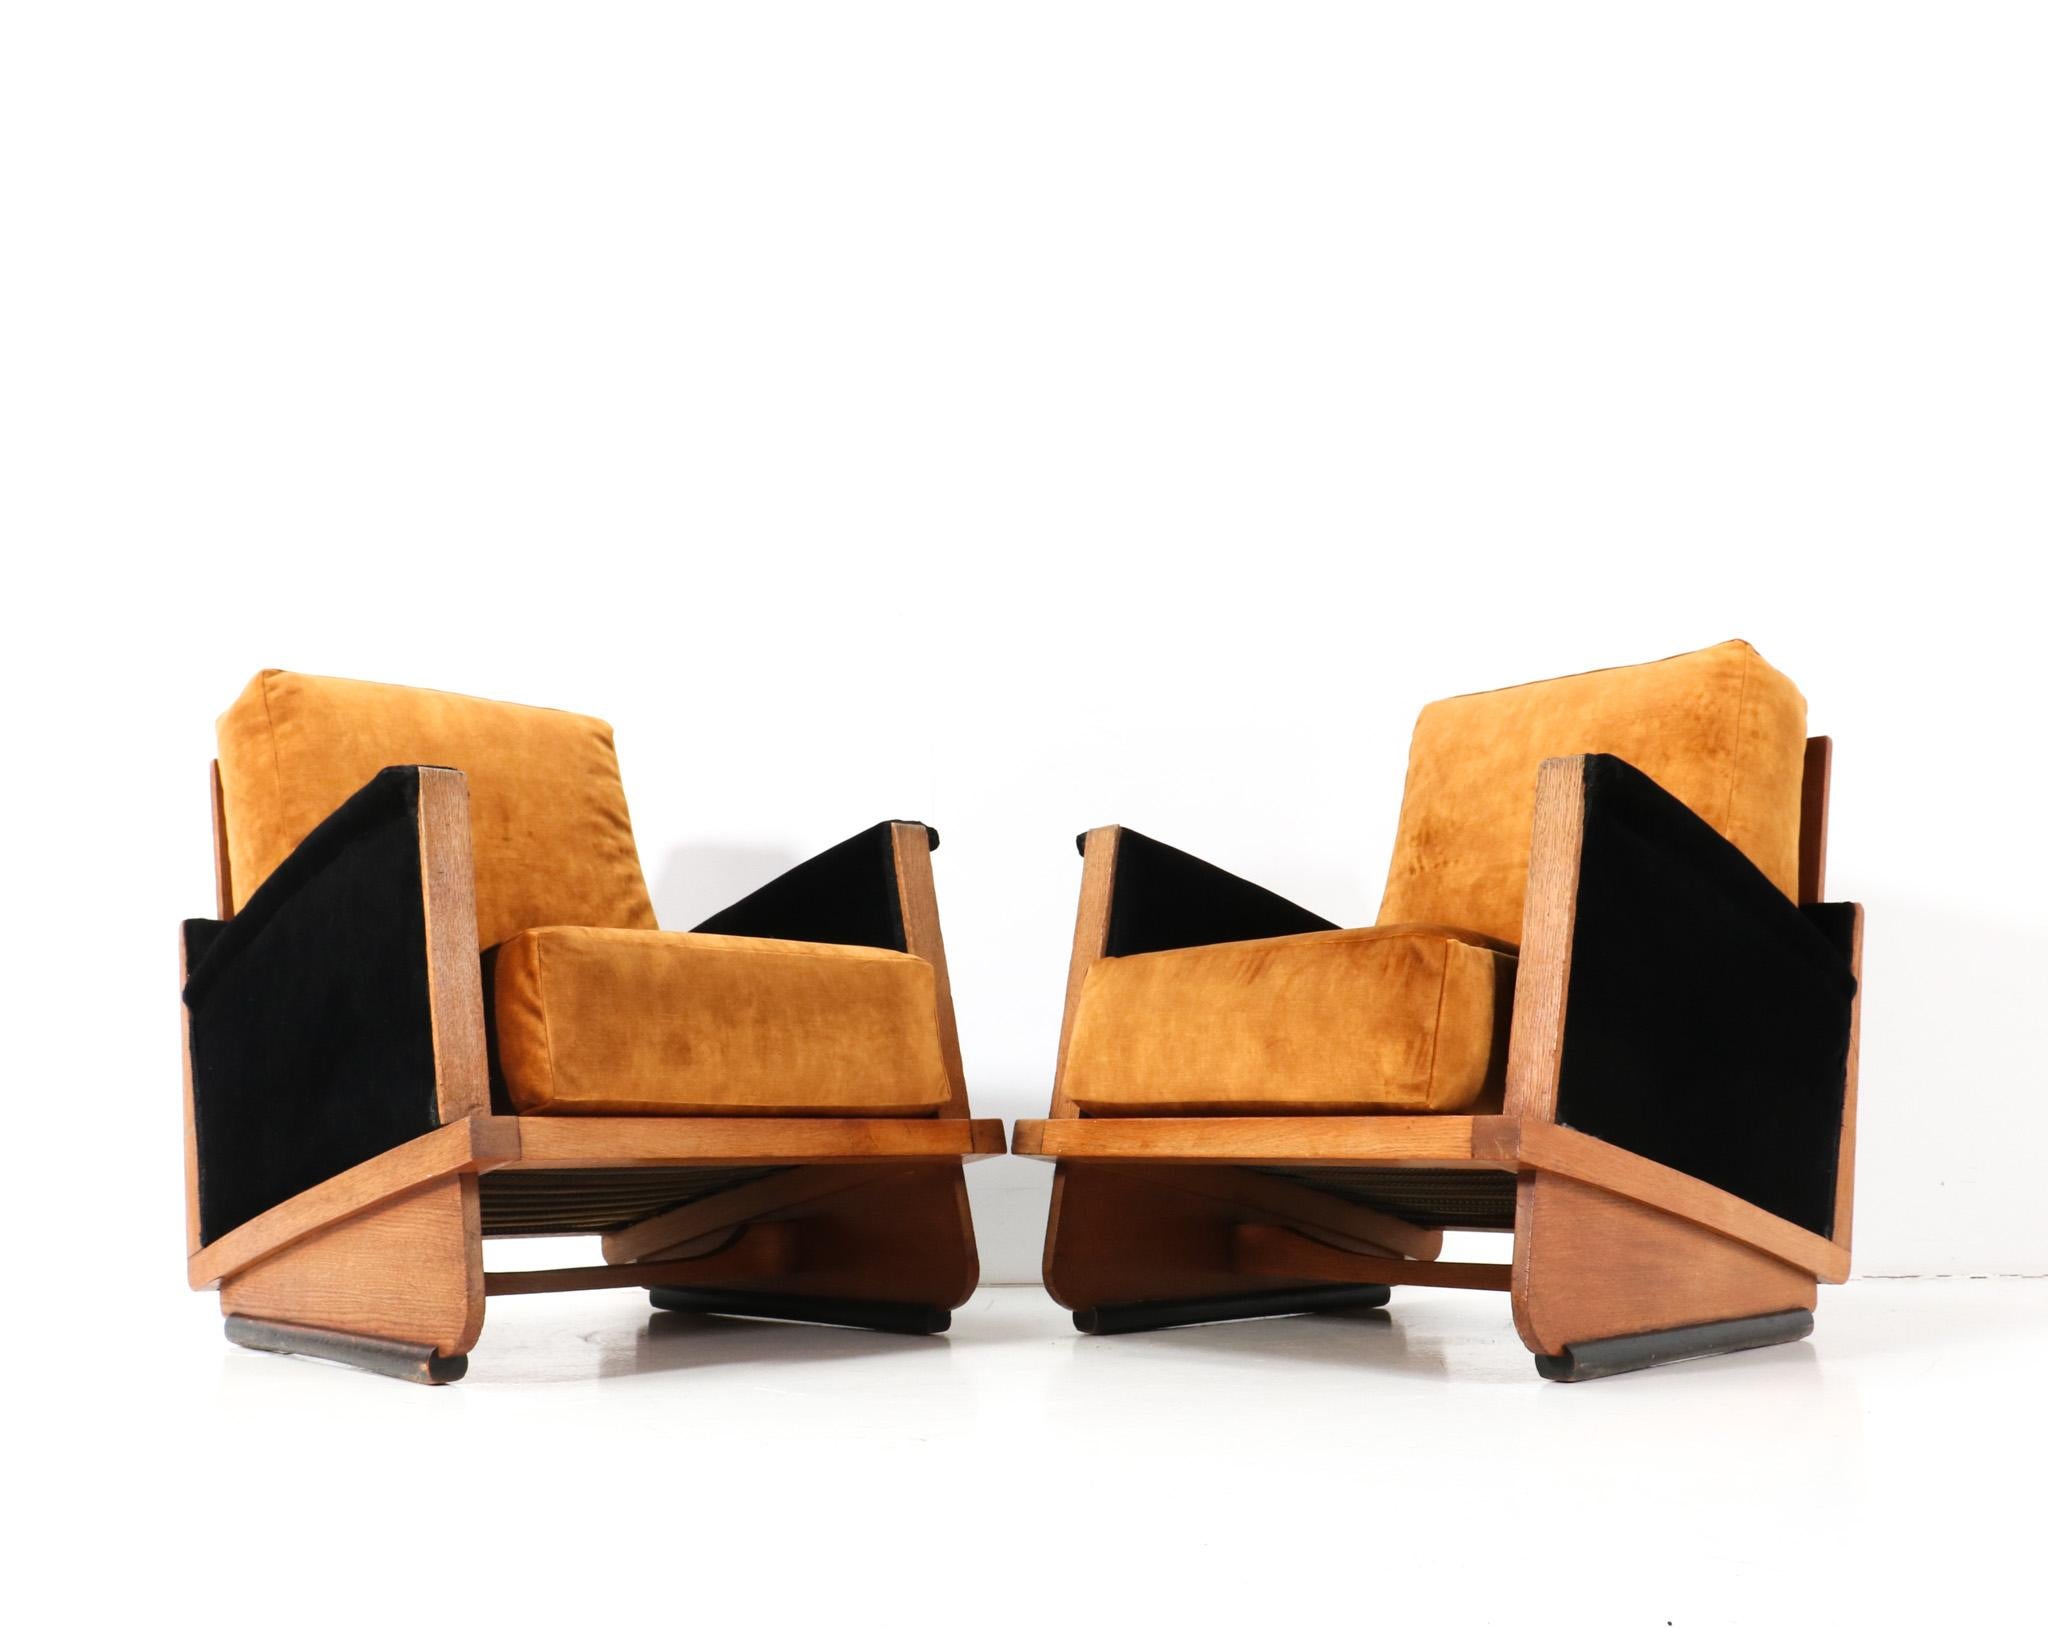 Magnificent and rare pair of Art Deco Modernist lounge chairs.
Striking Dutch design from the 1920s.
Solid oak frames on original black lacquered feet.
Re-upholstered with a quality two-tone fabric.
In very good original condition with minor